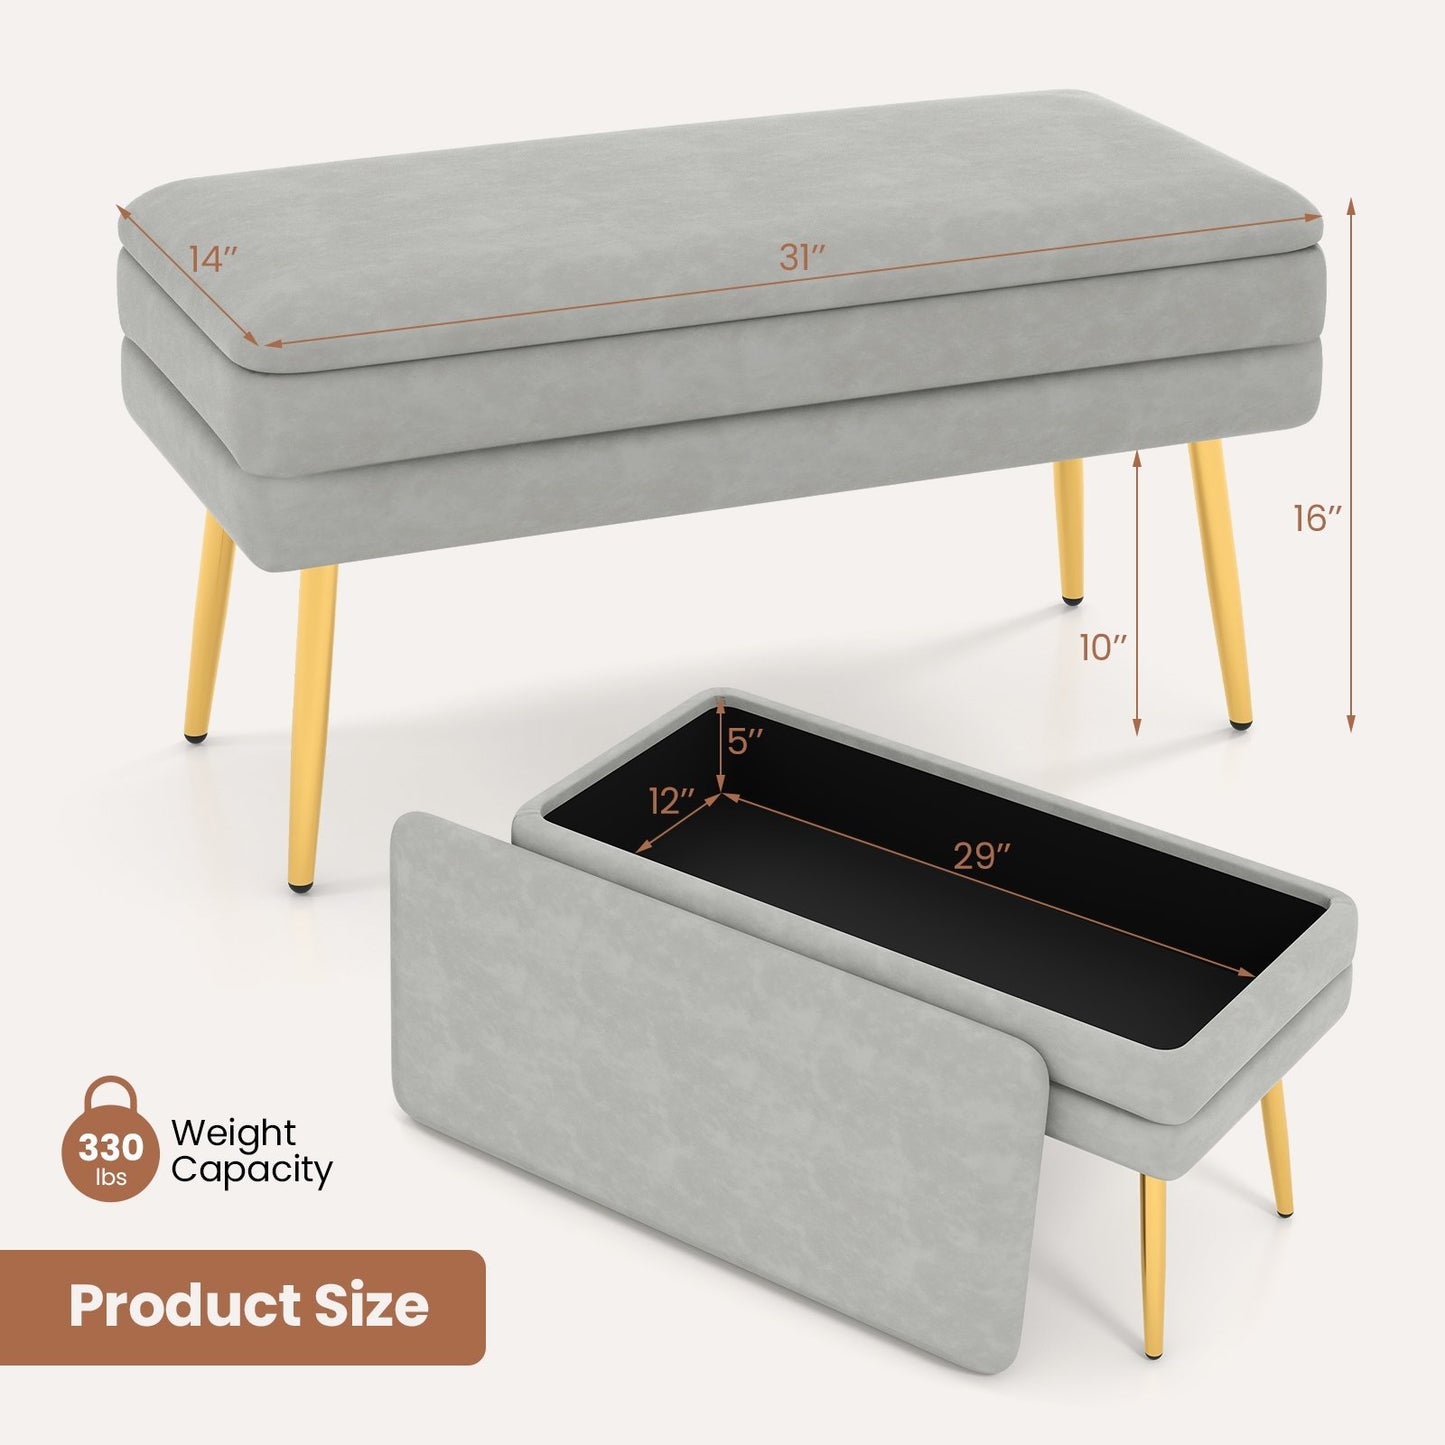 Velvet Upholstered Storage Bench with Removable Top-Grey, Gray